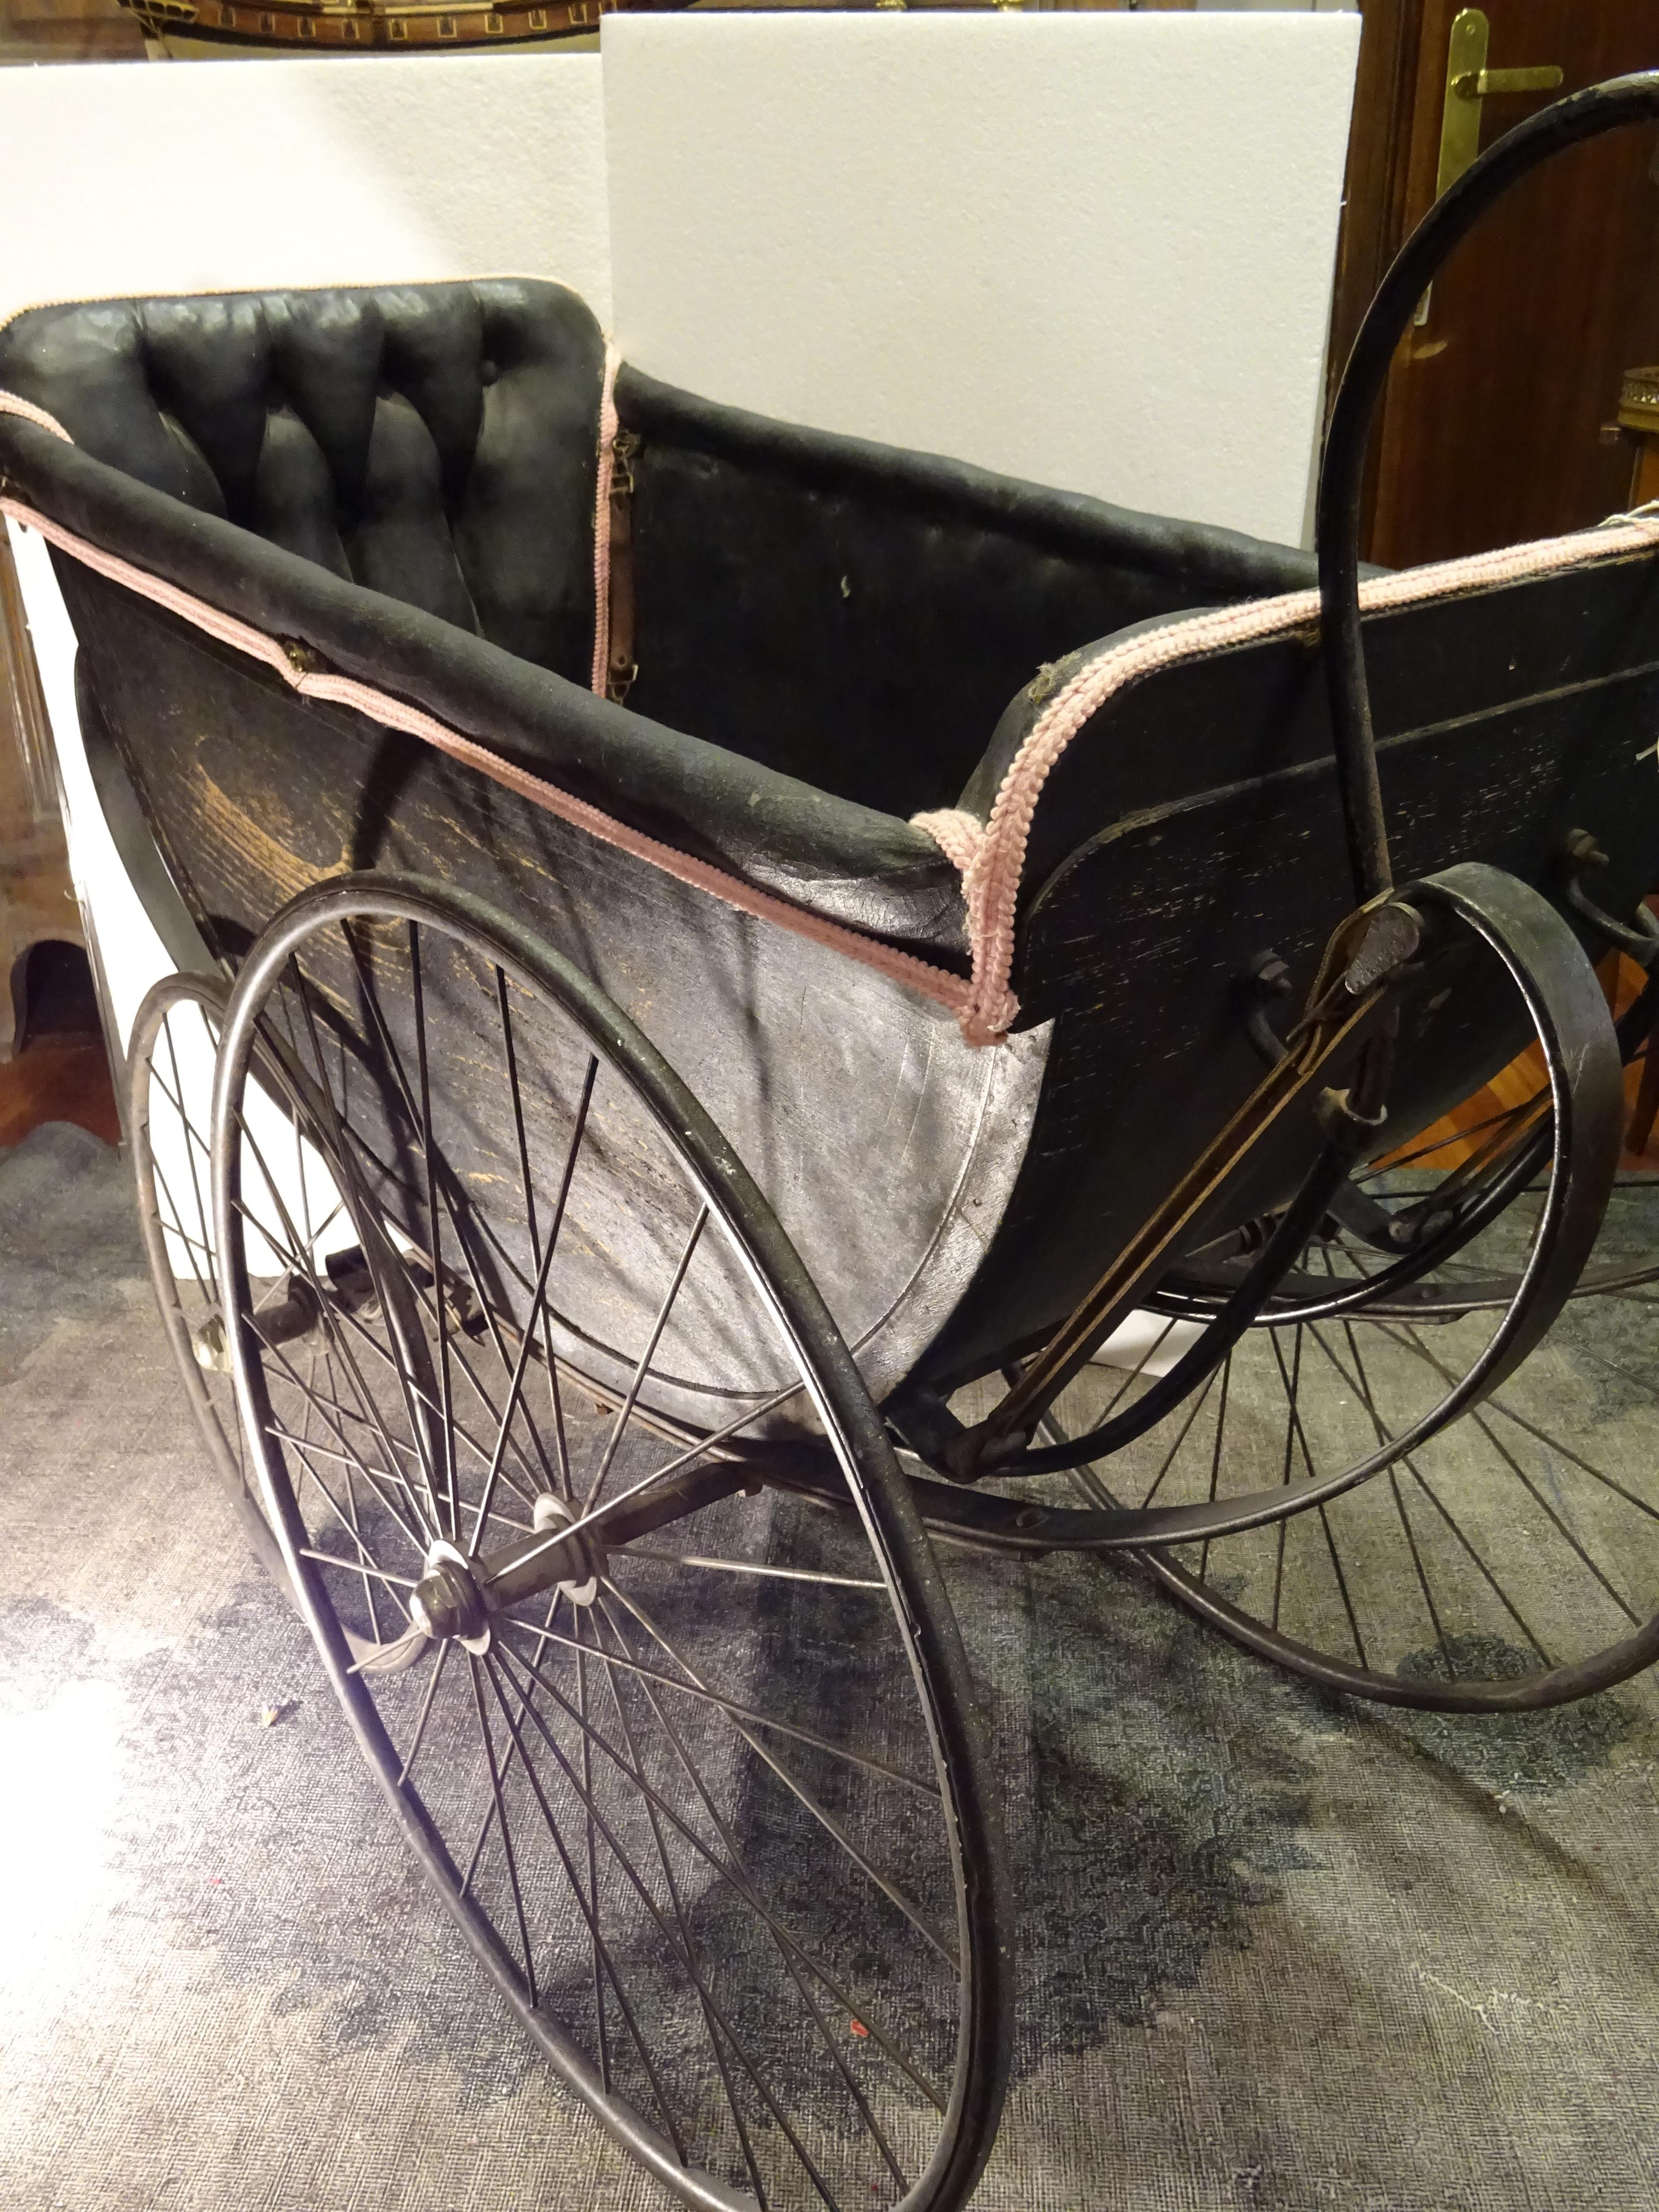 Amazing French Baby trolley in black wood with black capitone leather inside and pink bow.
Inside it can be transformed into a bed for newborns or into 2 seats for children with hidden space inside to store things.
To pull the trolley it has